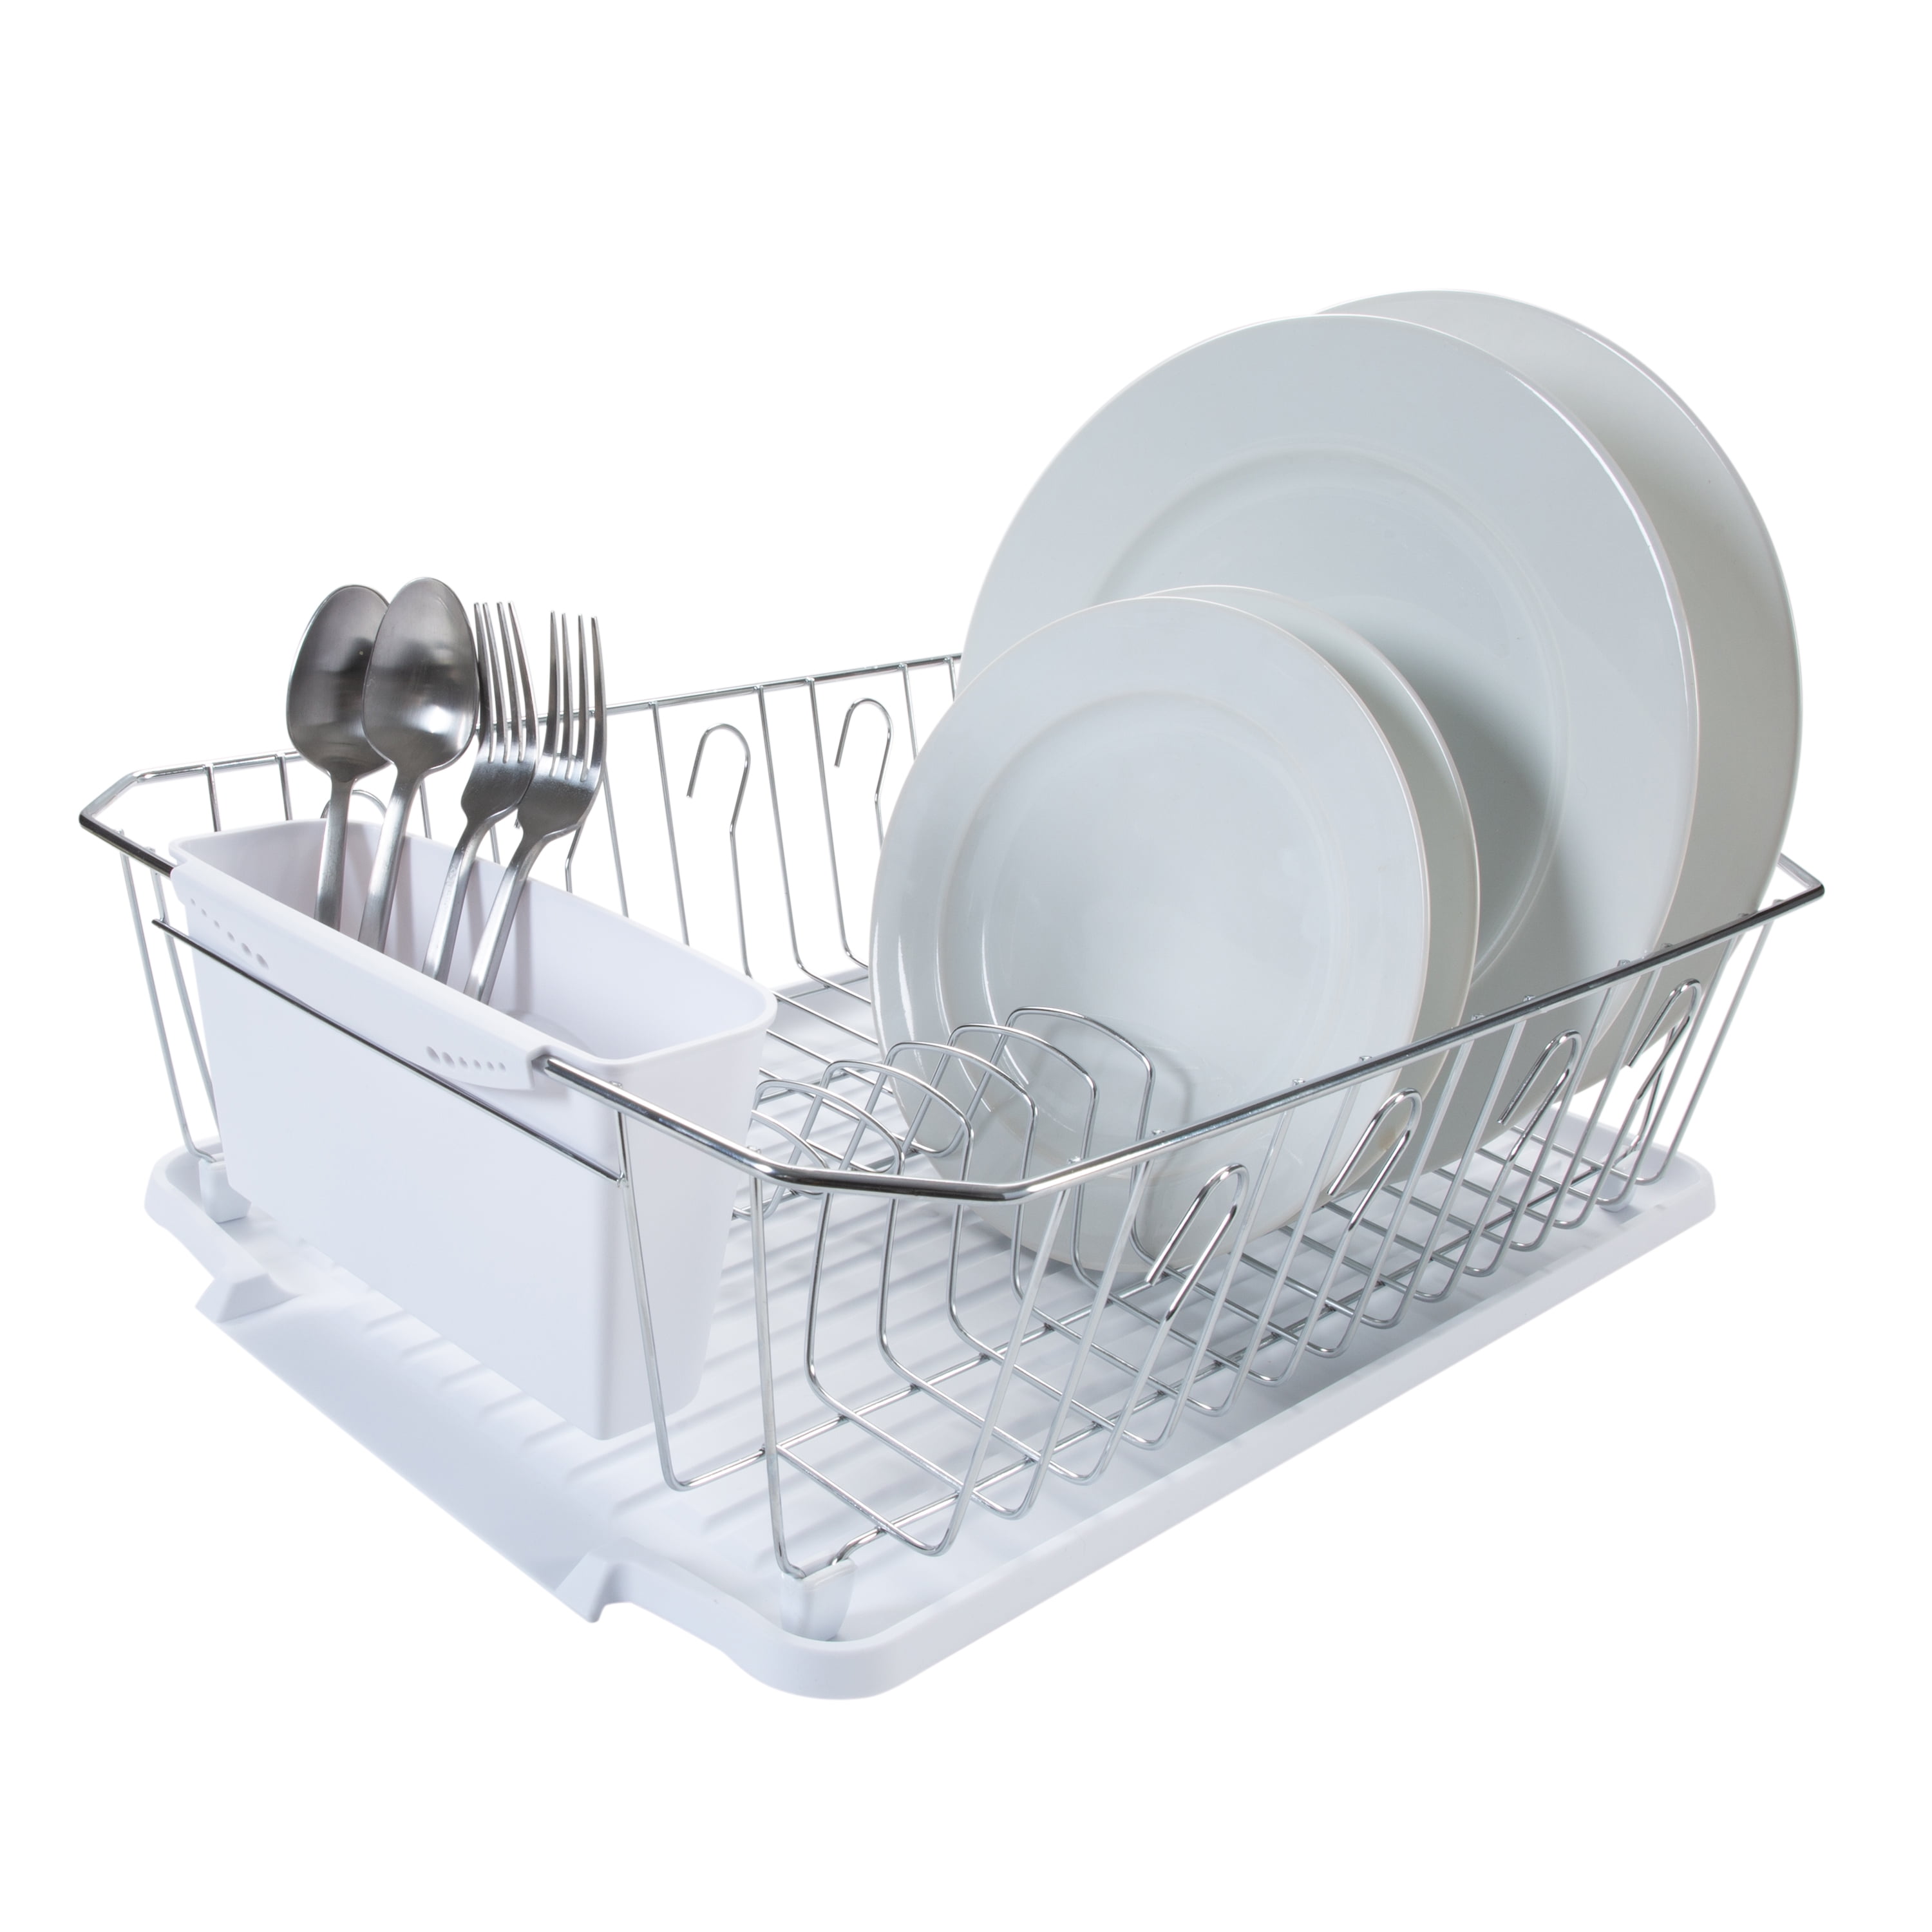 Portable Dish Rack with Drainboard Drainer Drying Kitchen Light